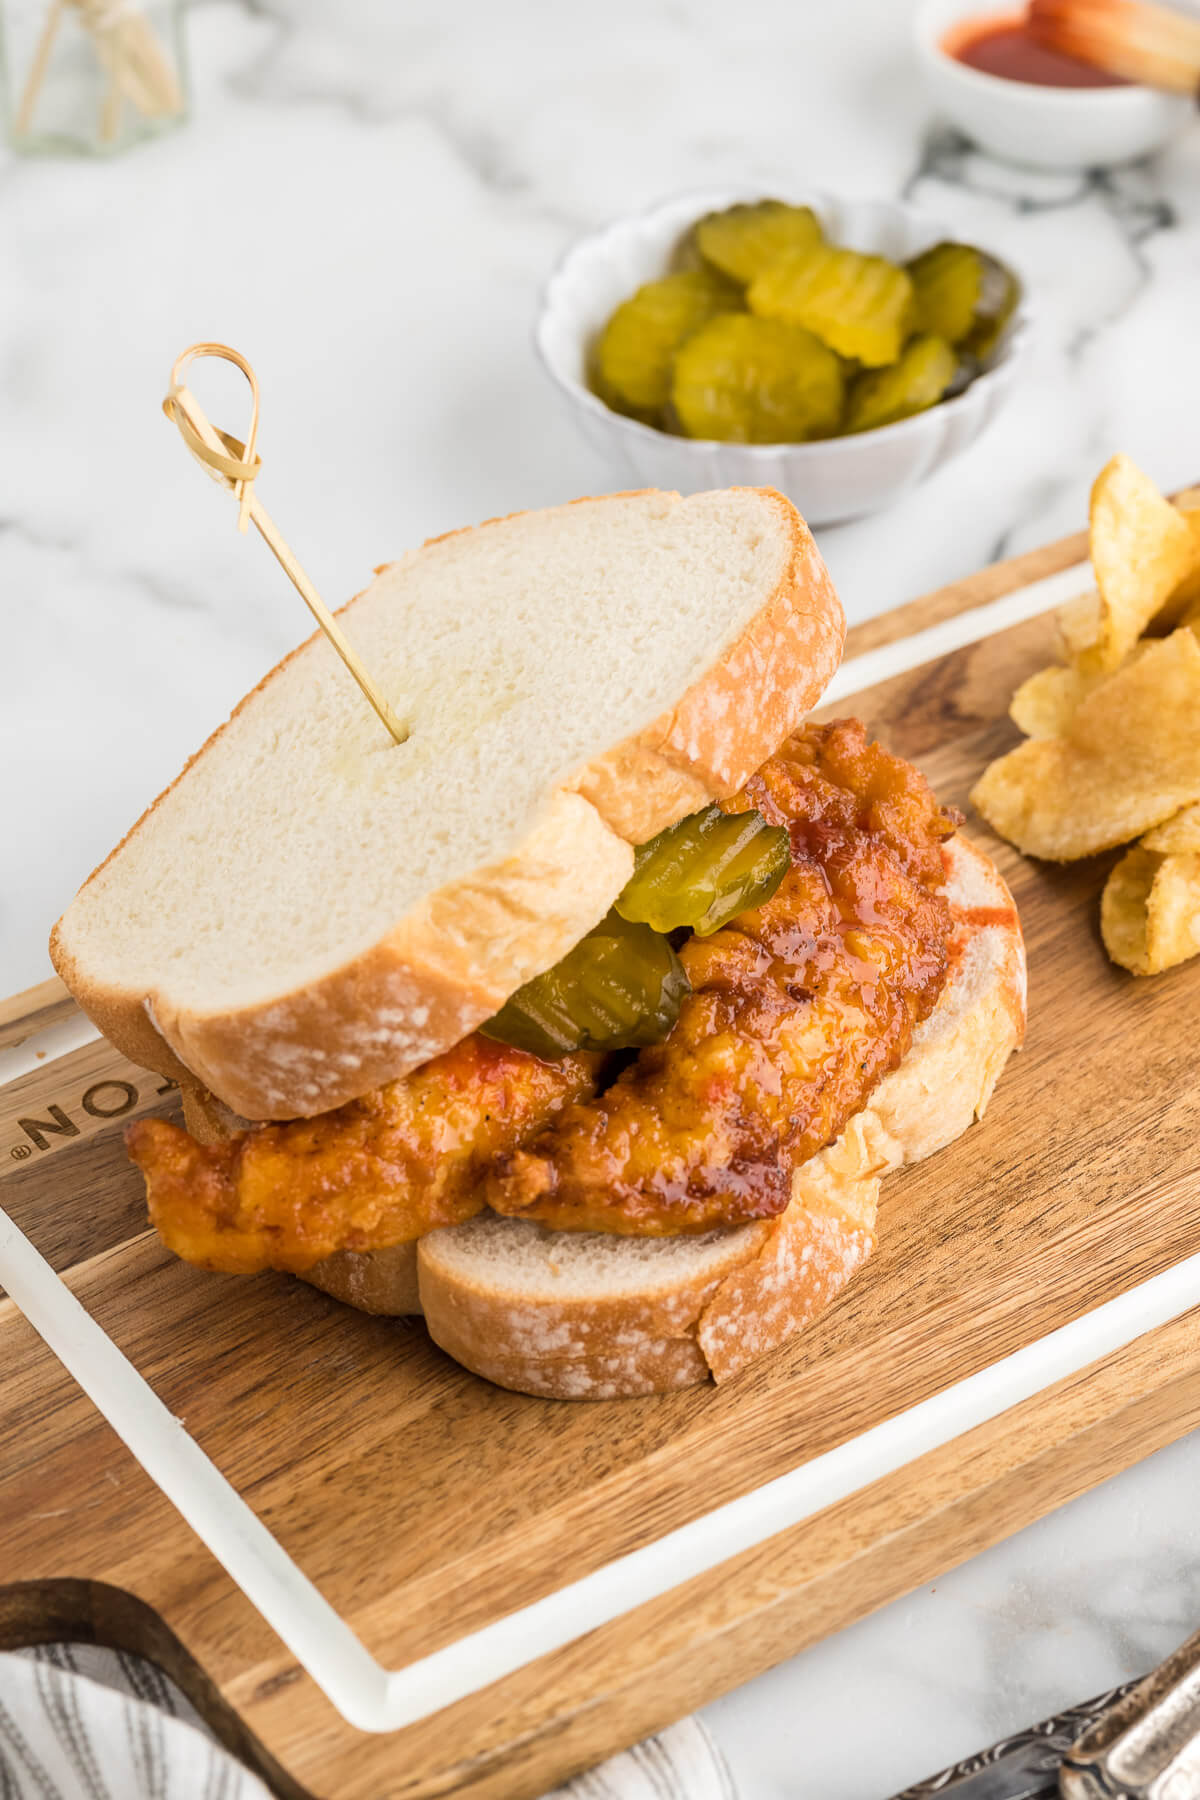 Nashville Style Hot Chicken Sandwich on a wooden board on a table.